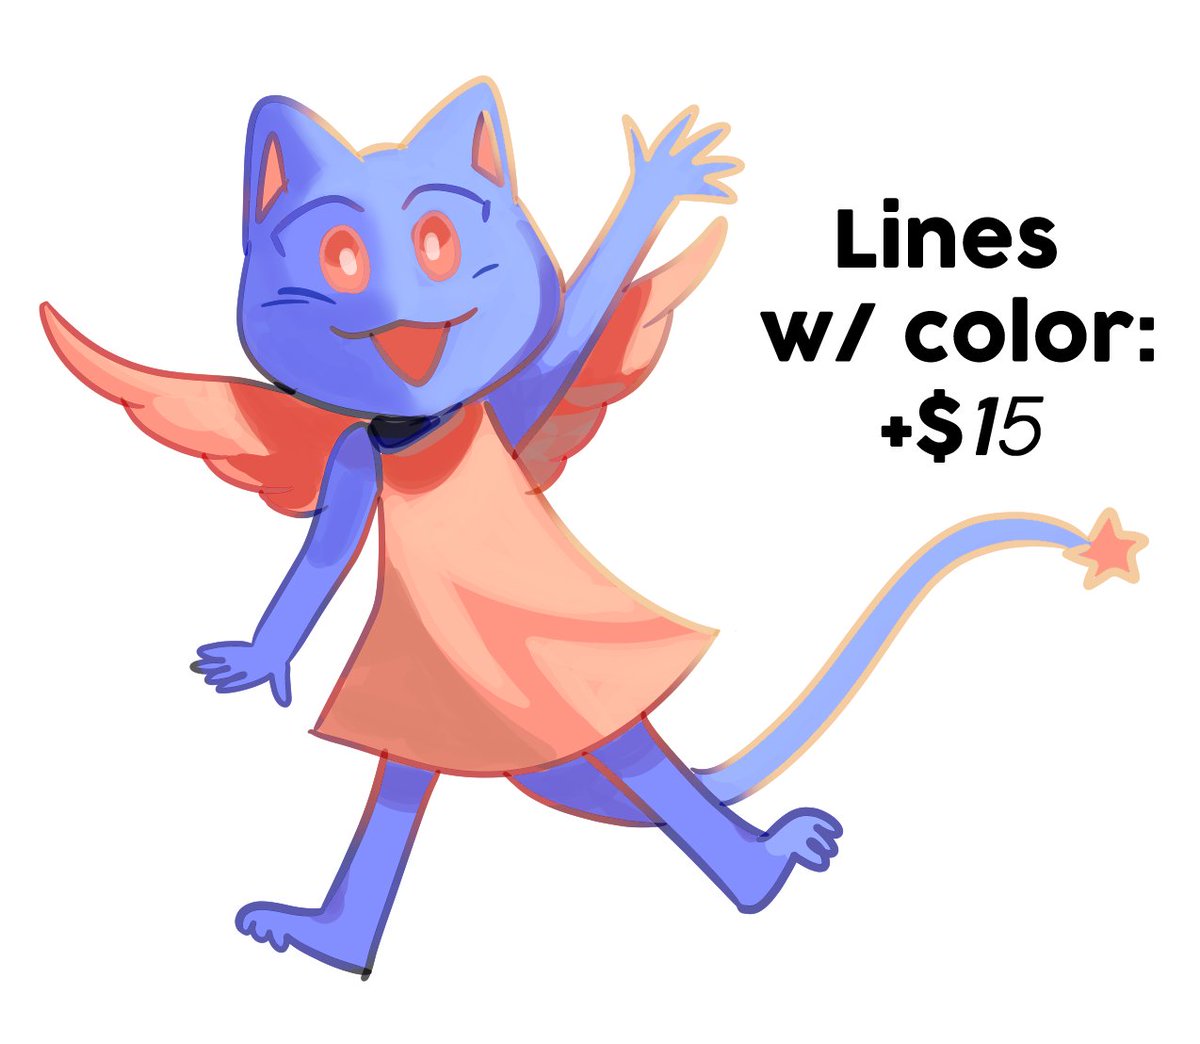 i'm offering character commissions in a chibi-esque style! starting at $10 USD; if you choose to upgrade to color, will be $25 total! you can fill out the form to be considered HERE: https://t.co/5kh4RI9ZJN 